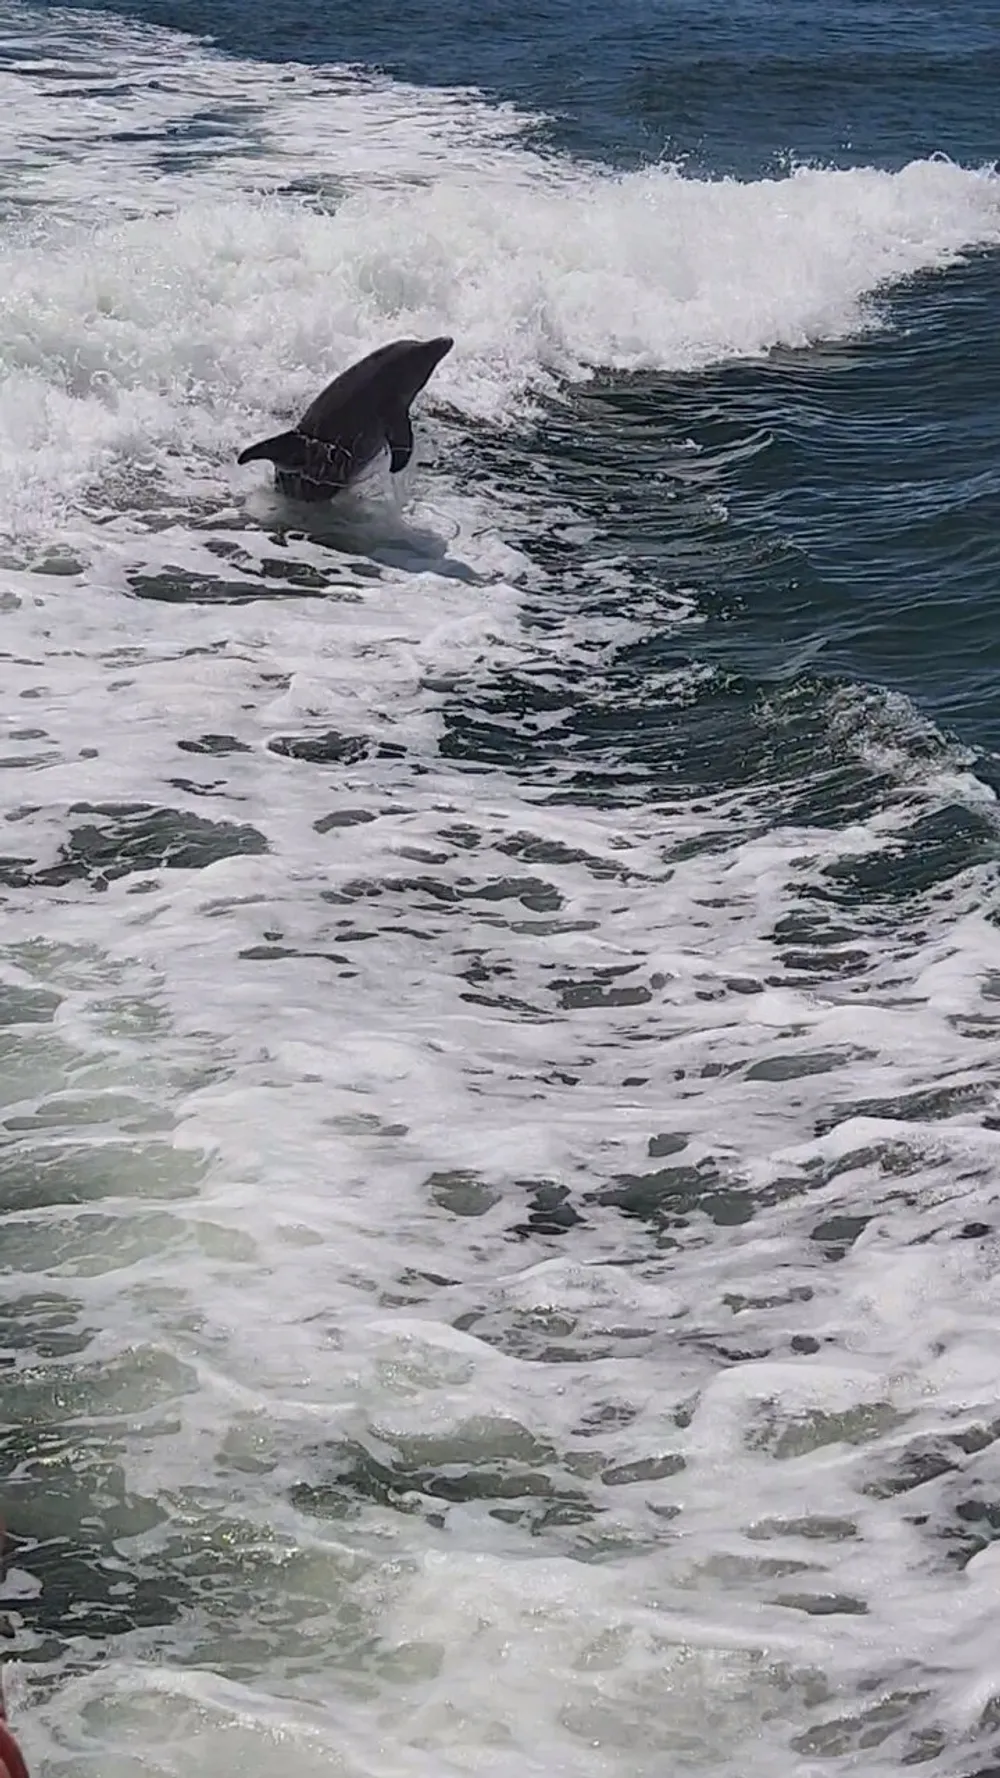 A dolphin is leaping out of the foamy waters of a wave